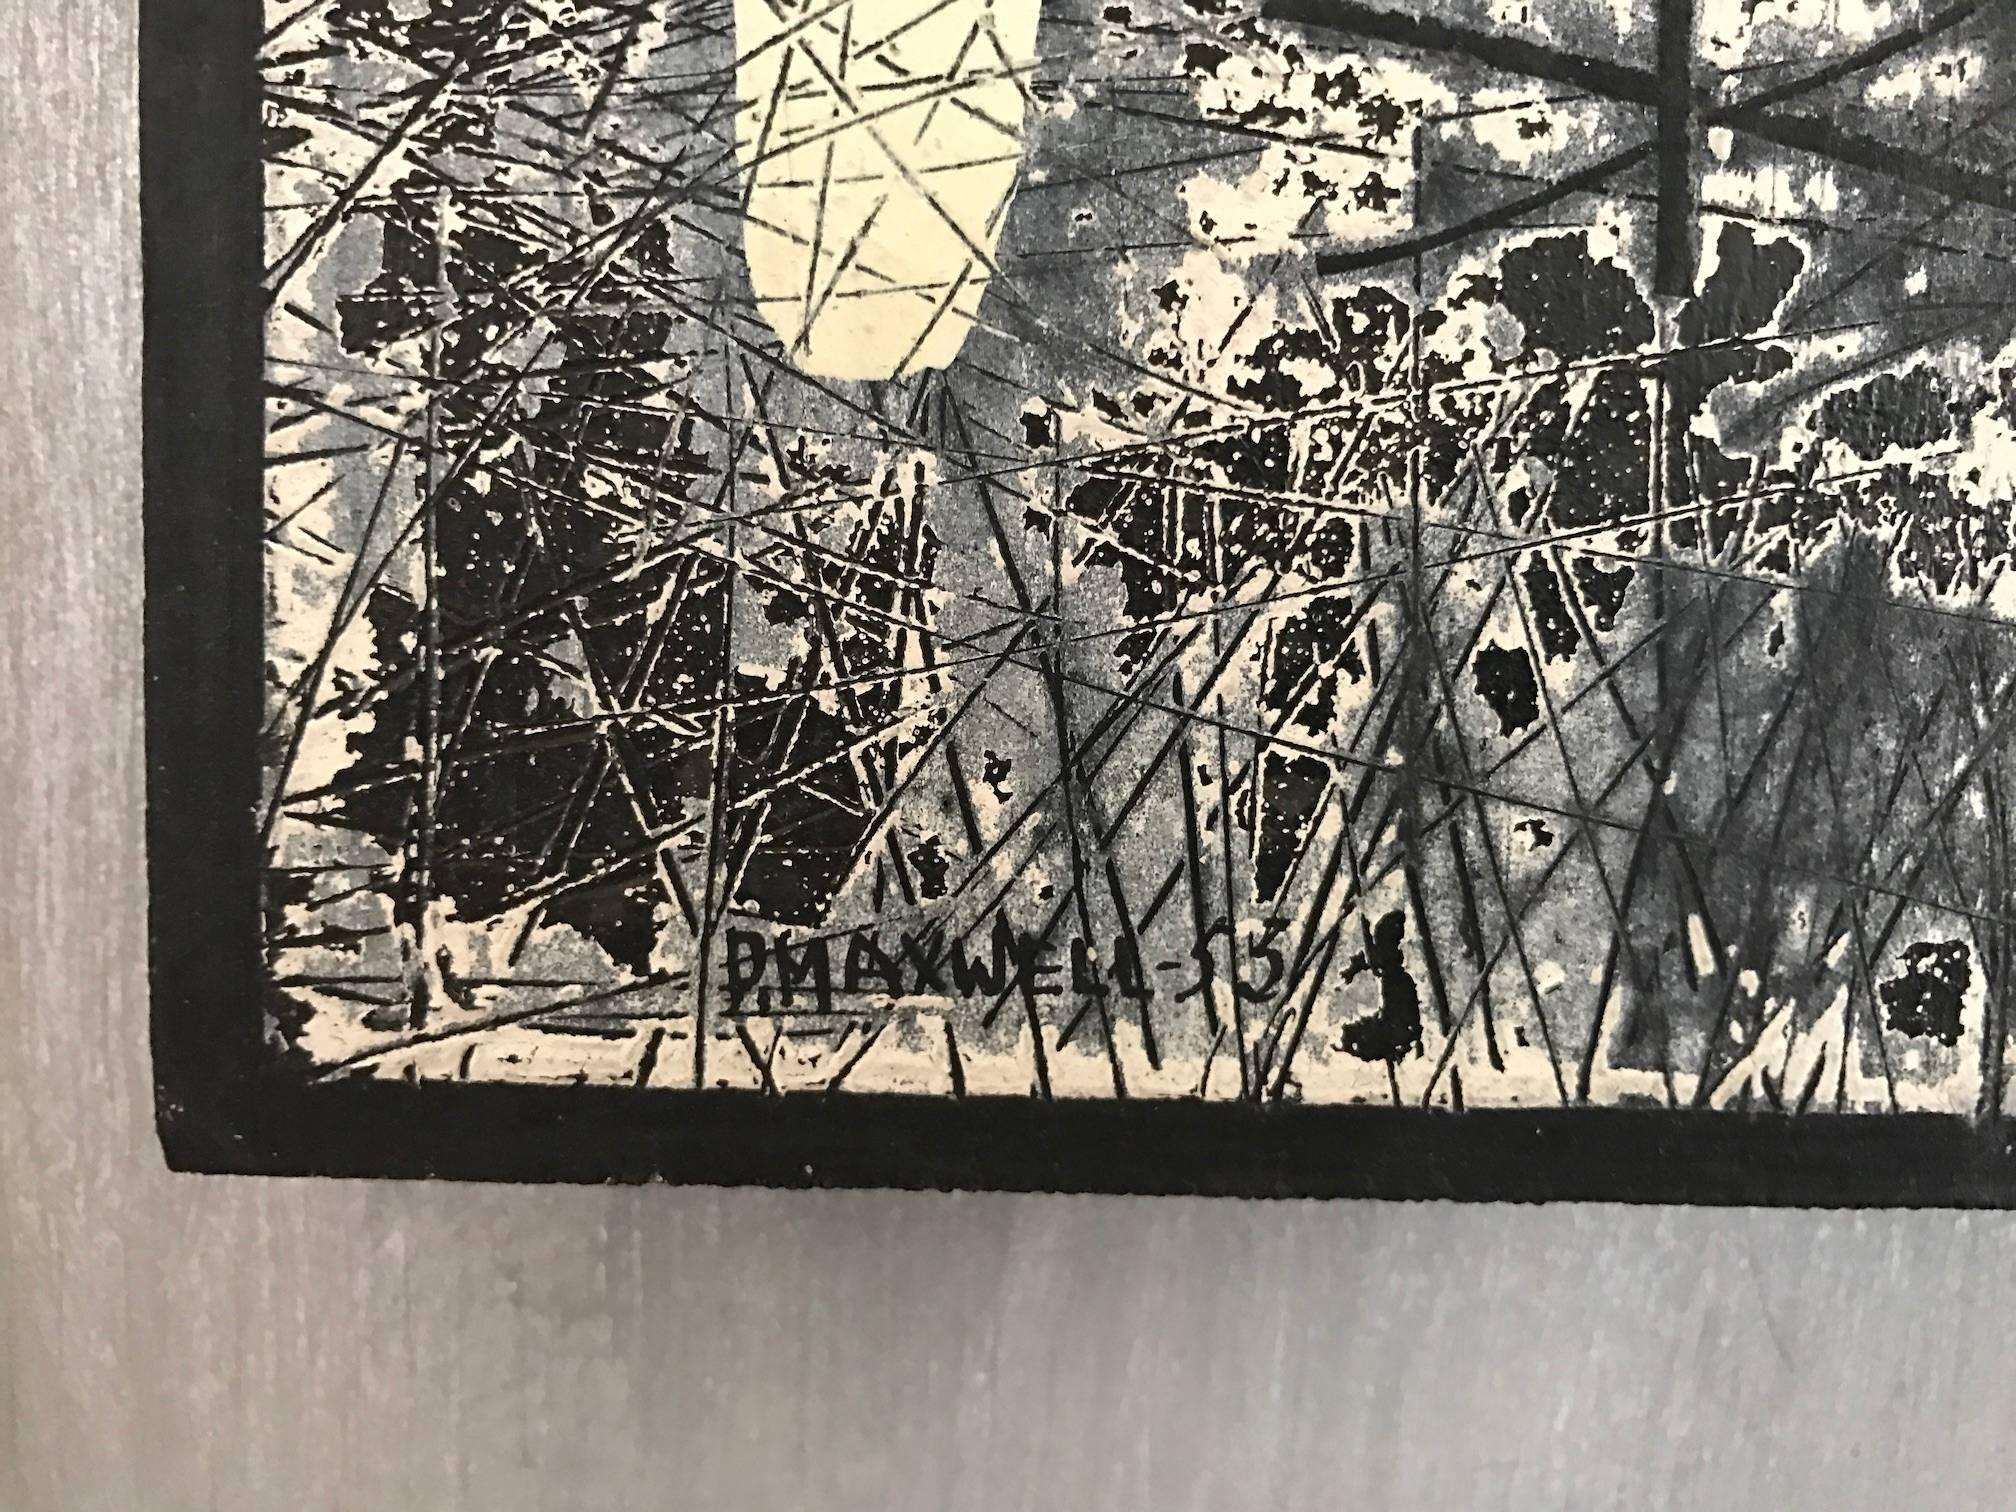 Early abstract painting done by Paul Maxwell in 1955 in black, gray, and cream tones titled 